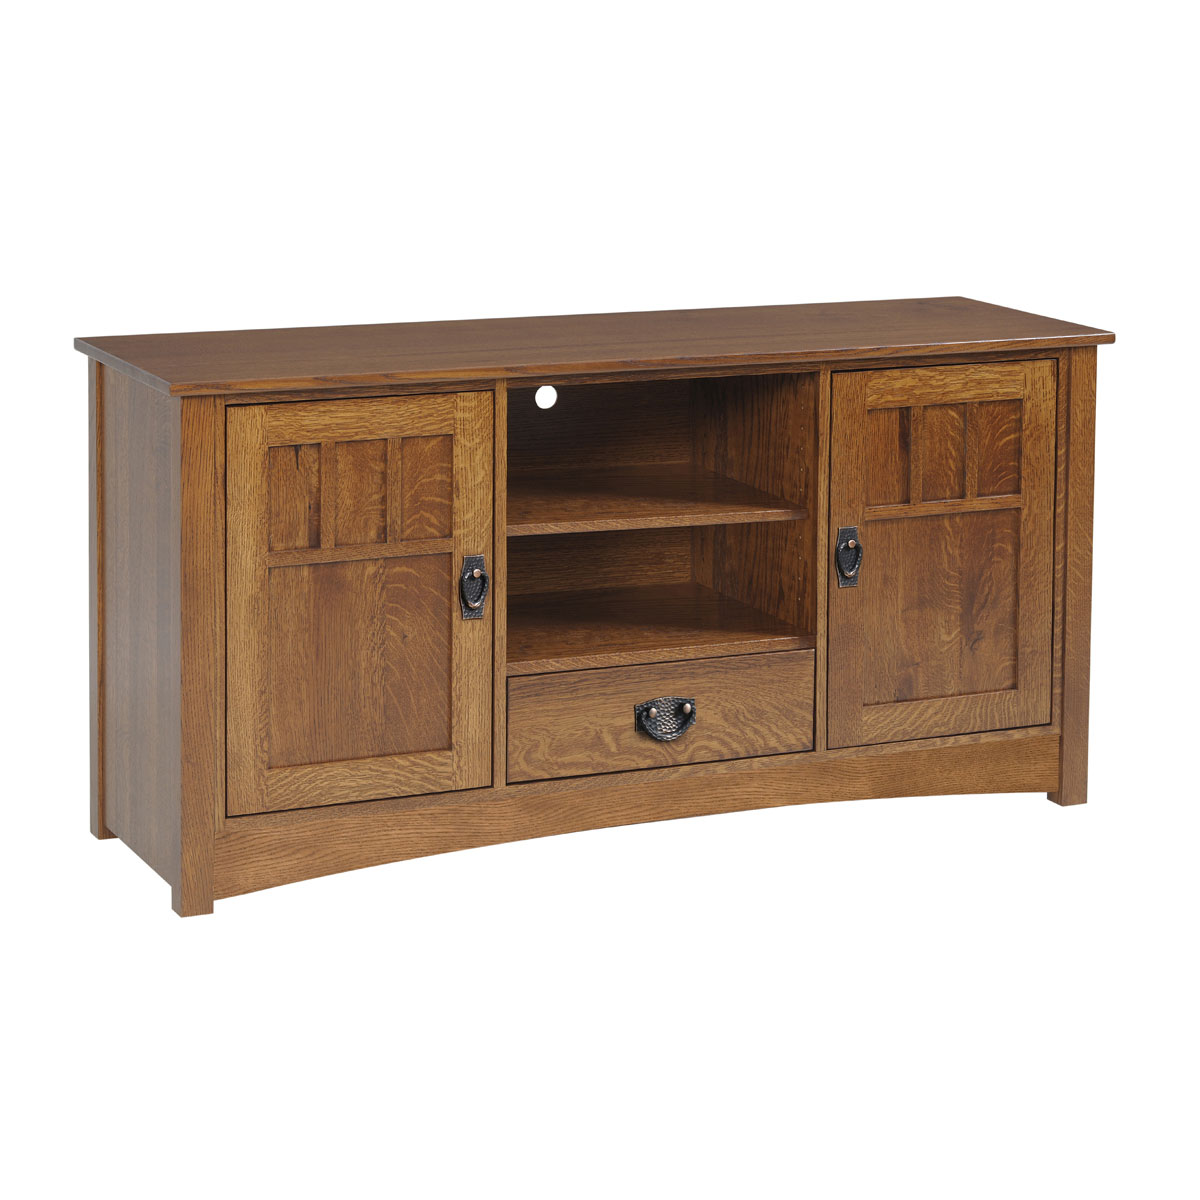 Liberty Mission 2 Door, 1 Drawer TV Stand